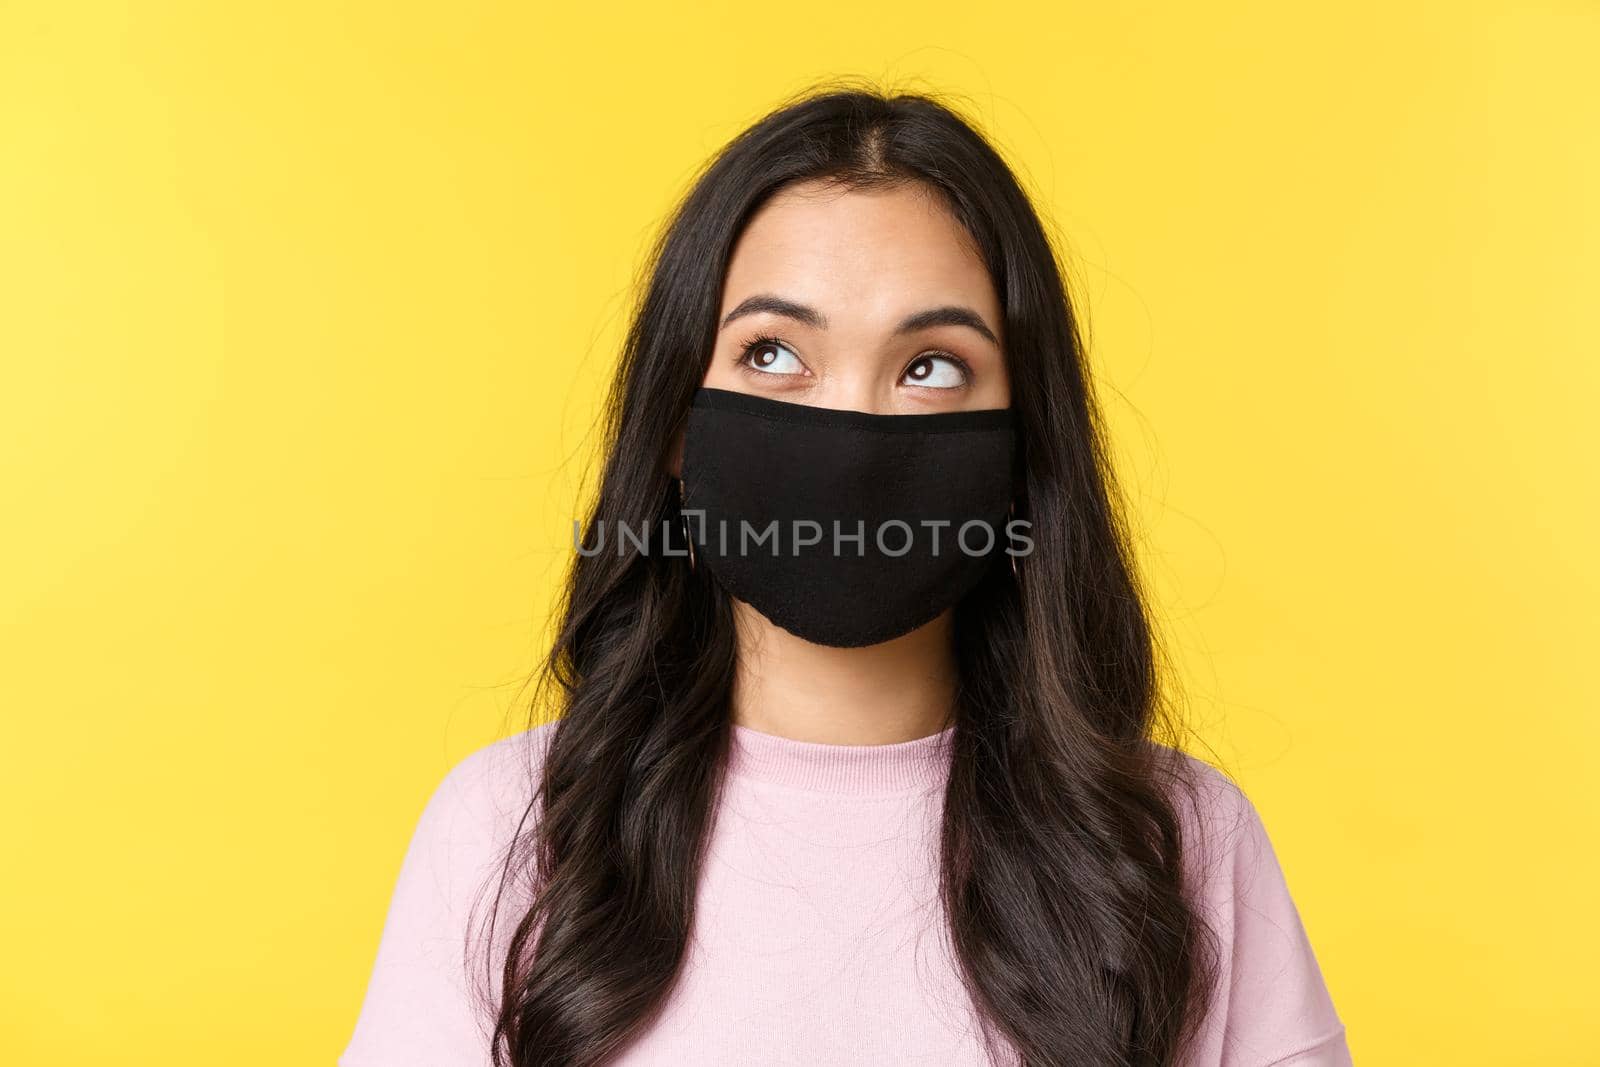 Covid-19, social-distancing lifestyle, prevent virus spread concept. Dreamy and thoughtful asian girl in face mask, looking upper left corner thinking, standing yellow background.